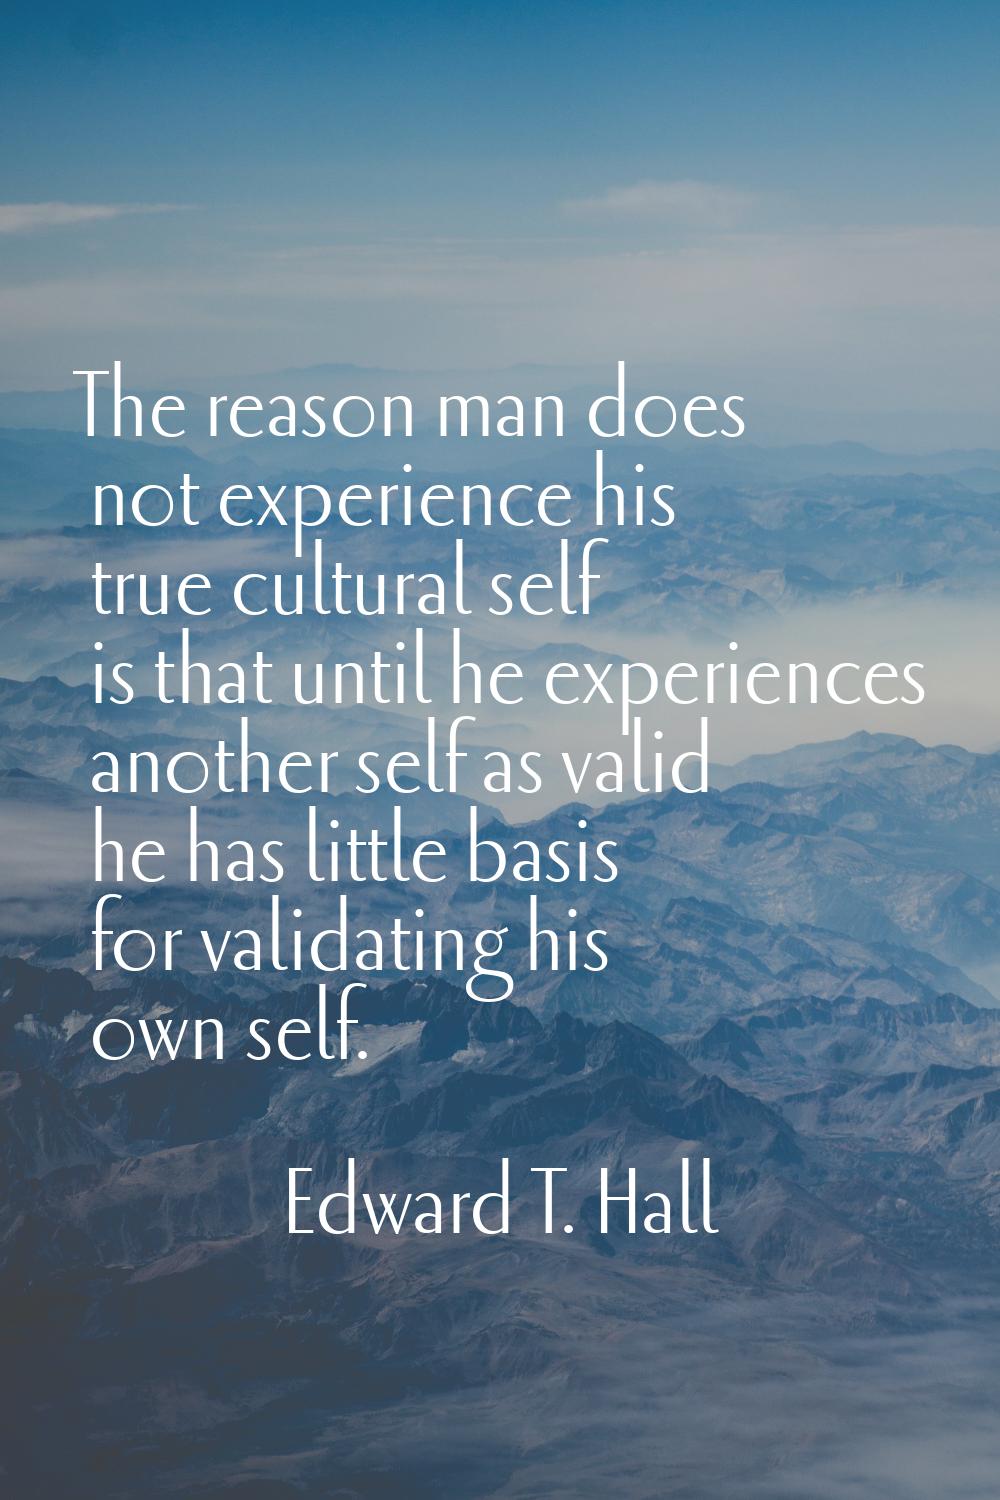 The reason man does not experience his true cultural self is that until he experiences another self